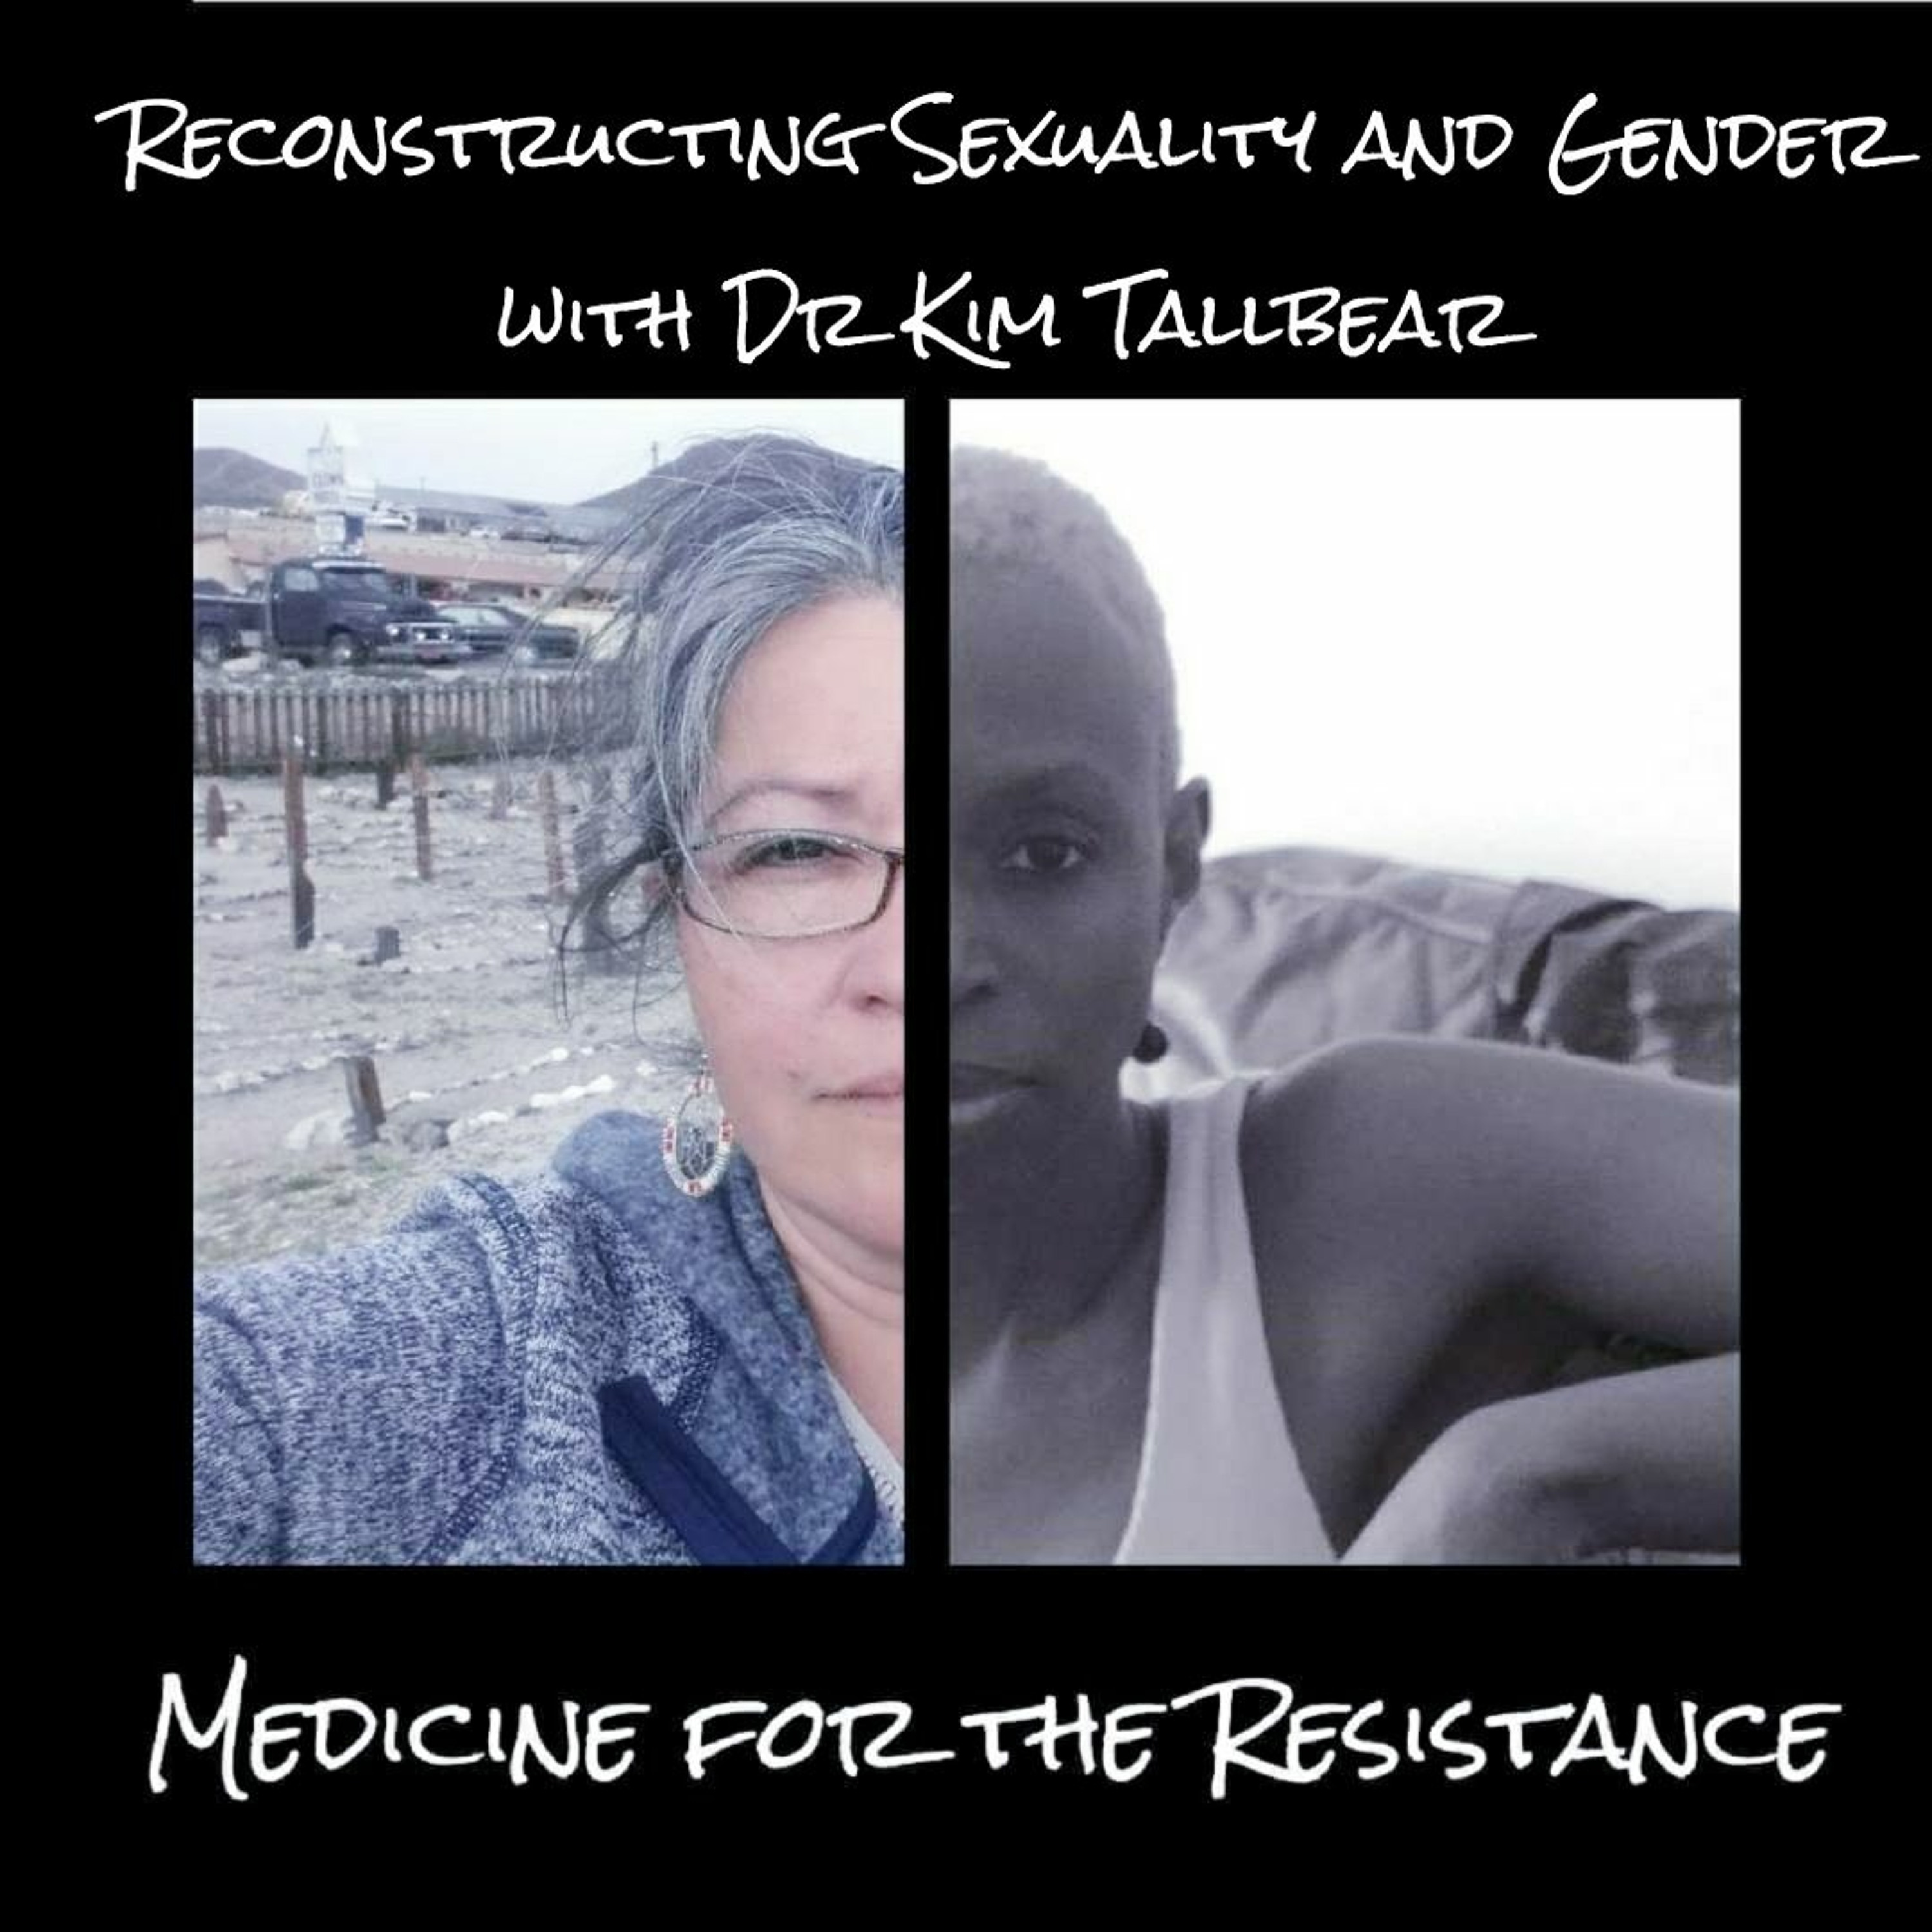 Reconstructing sexuality with Dr. Kim Tallbear.  Gender and Sexuality series.